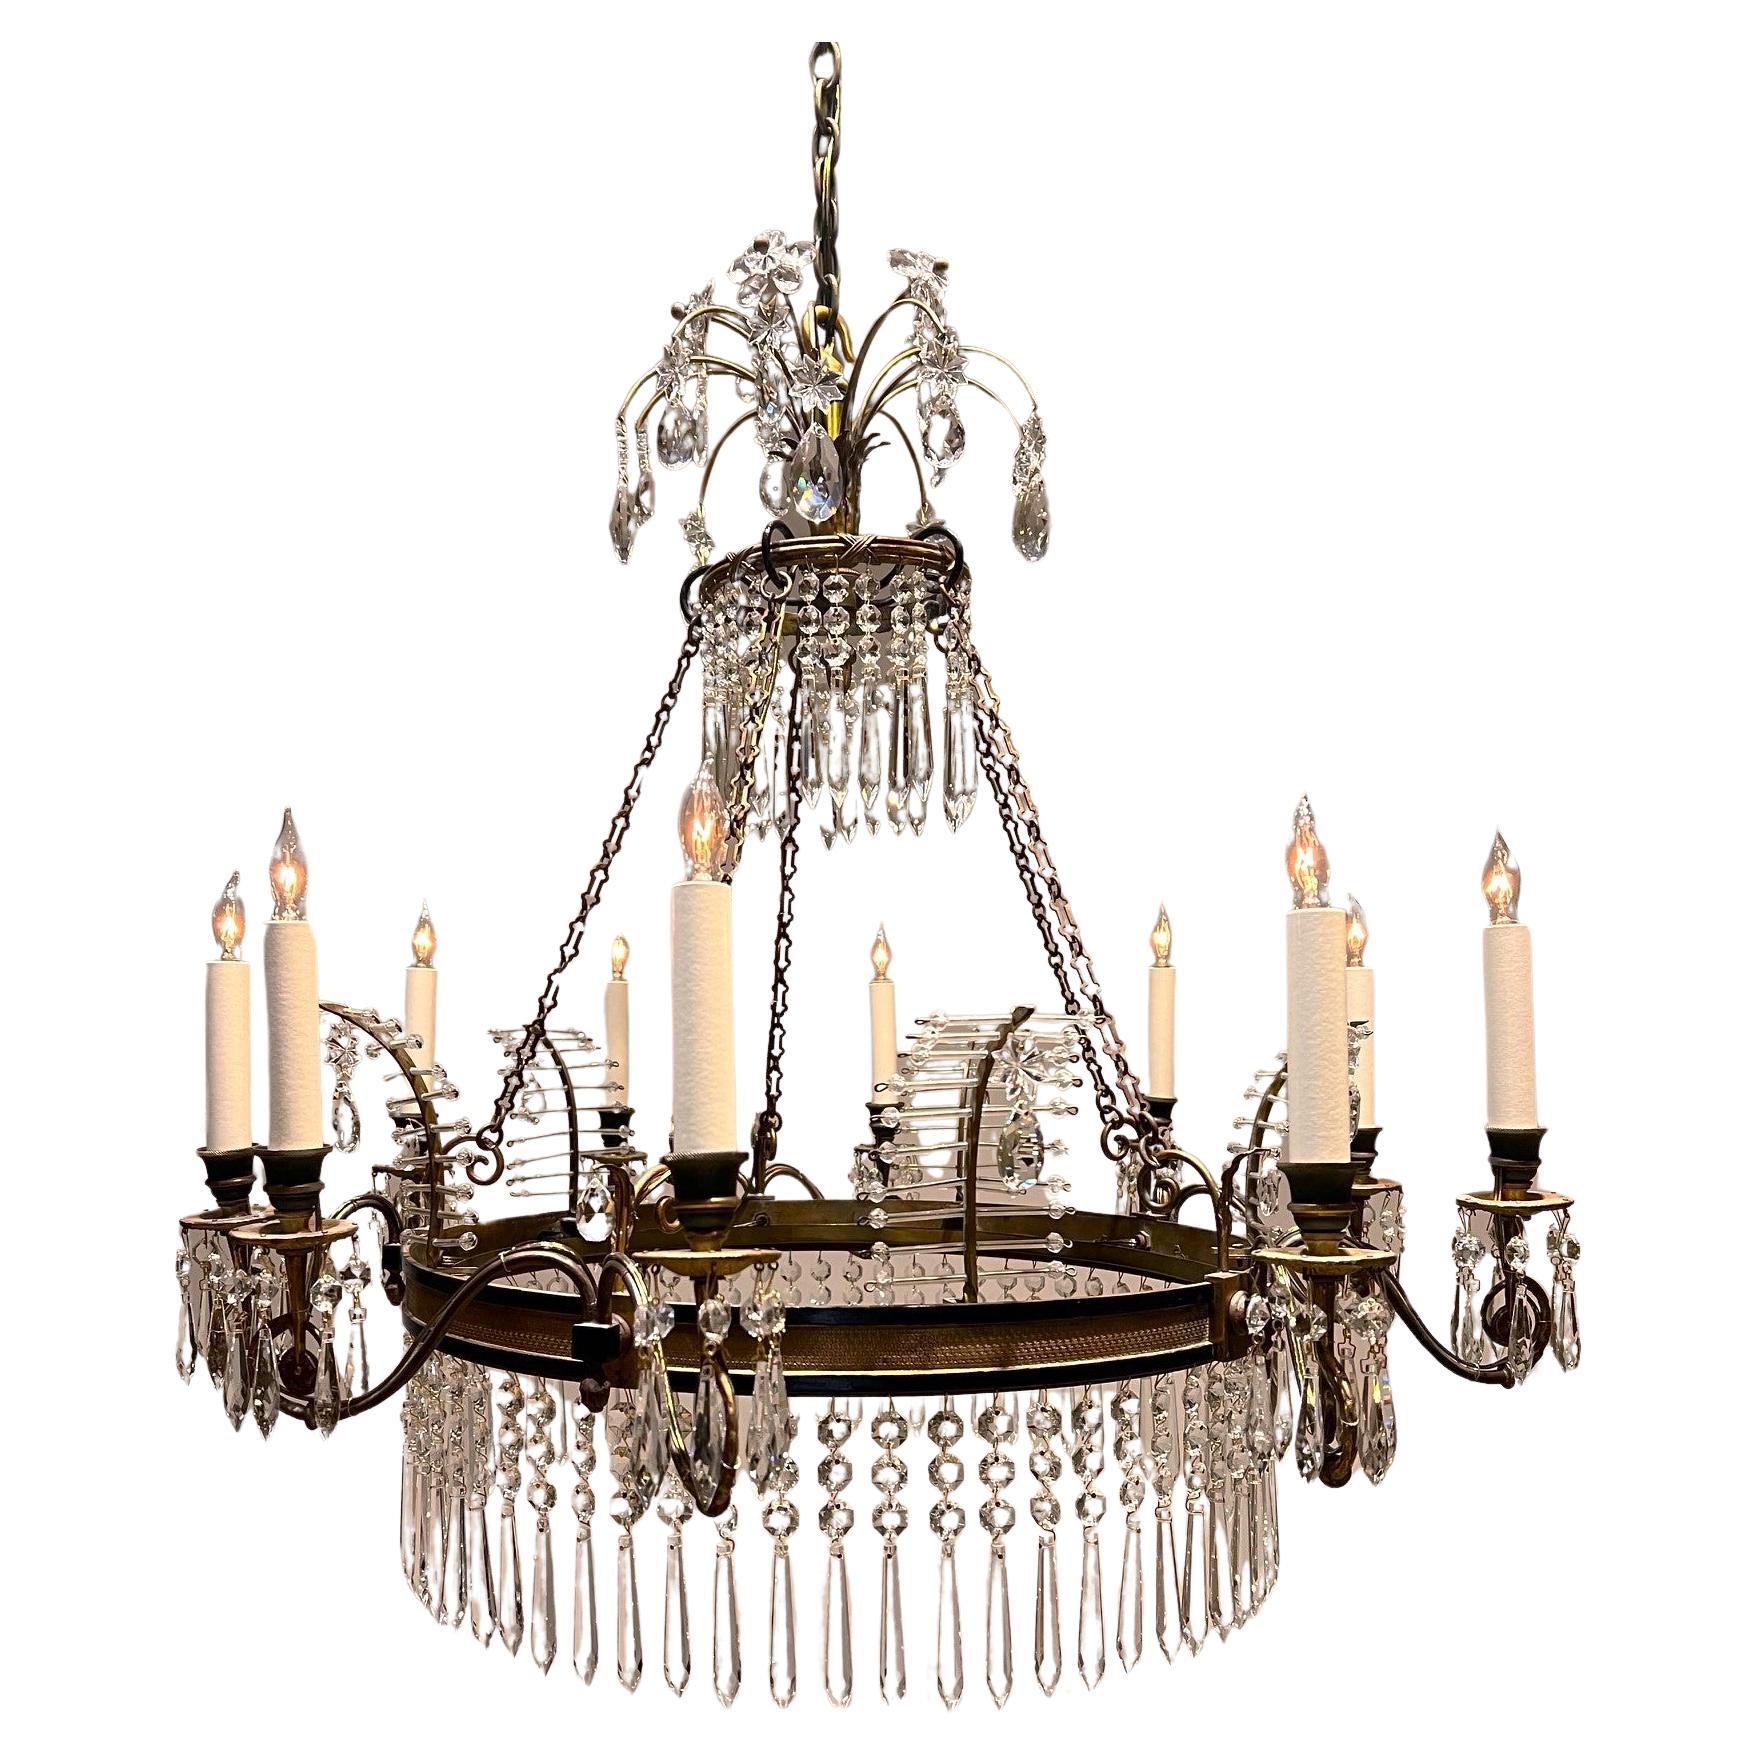 Neo-Classic Style 10-Light Bronze & Crystal Chandelier, Italy, Circa:1920 For Sale